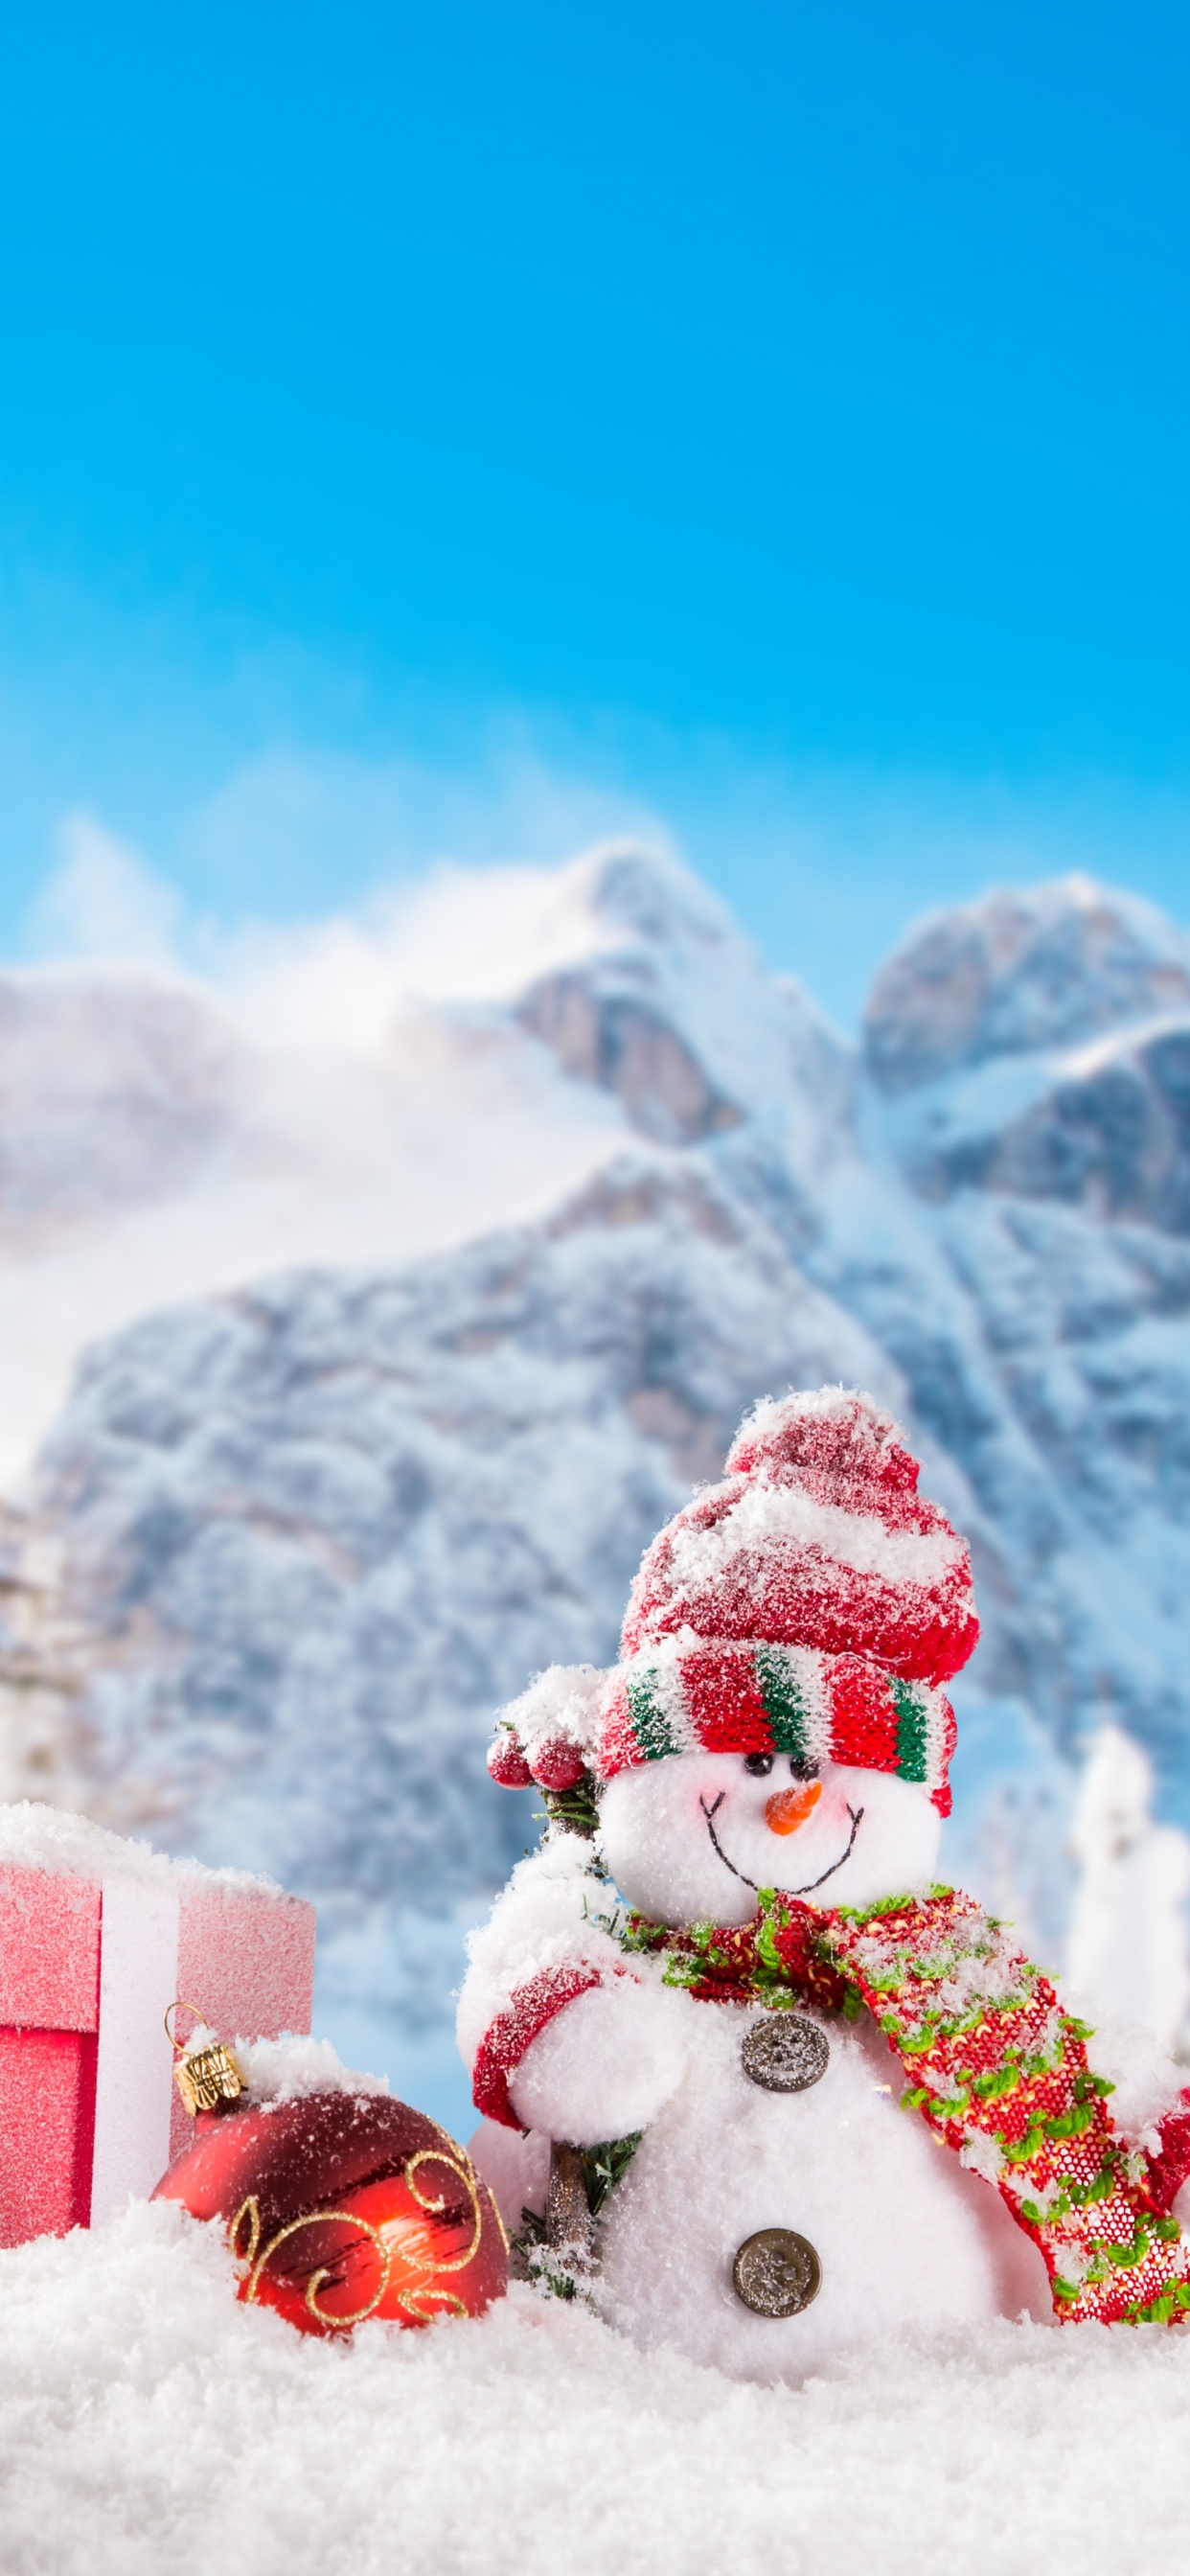 Red and White Santa Claus on Snow Covered Ground During Daytime. Wallpaper in 1242x2688 Resolution